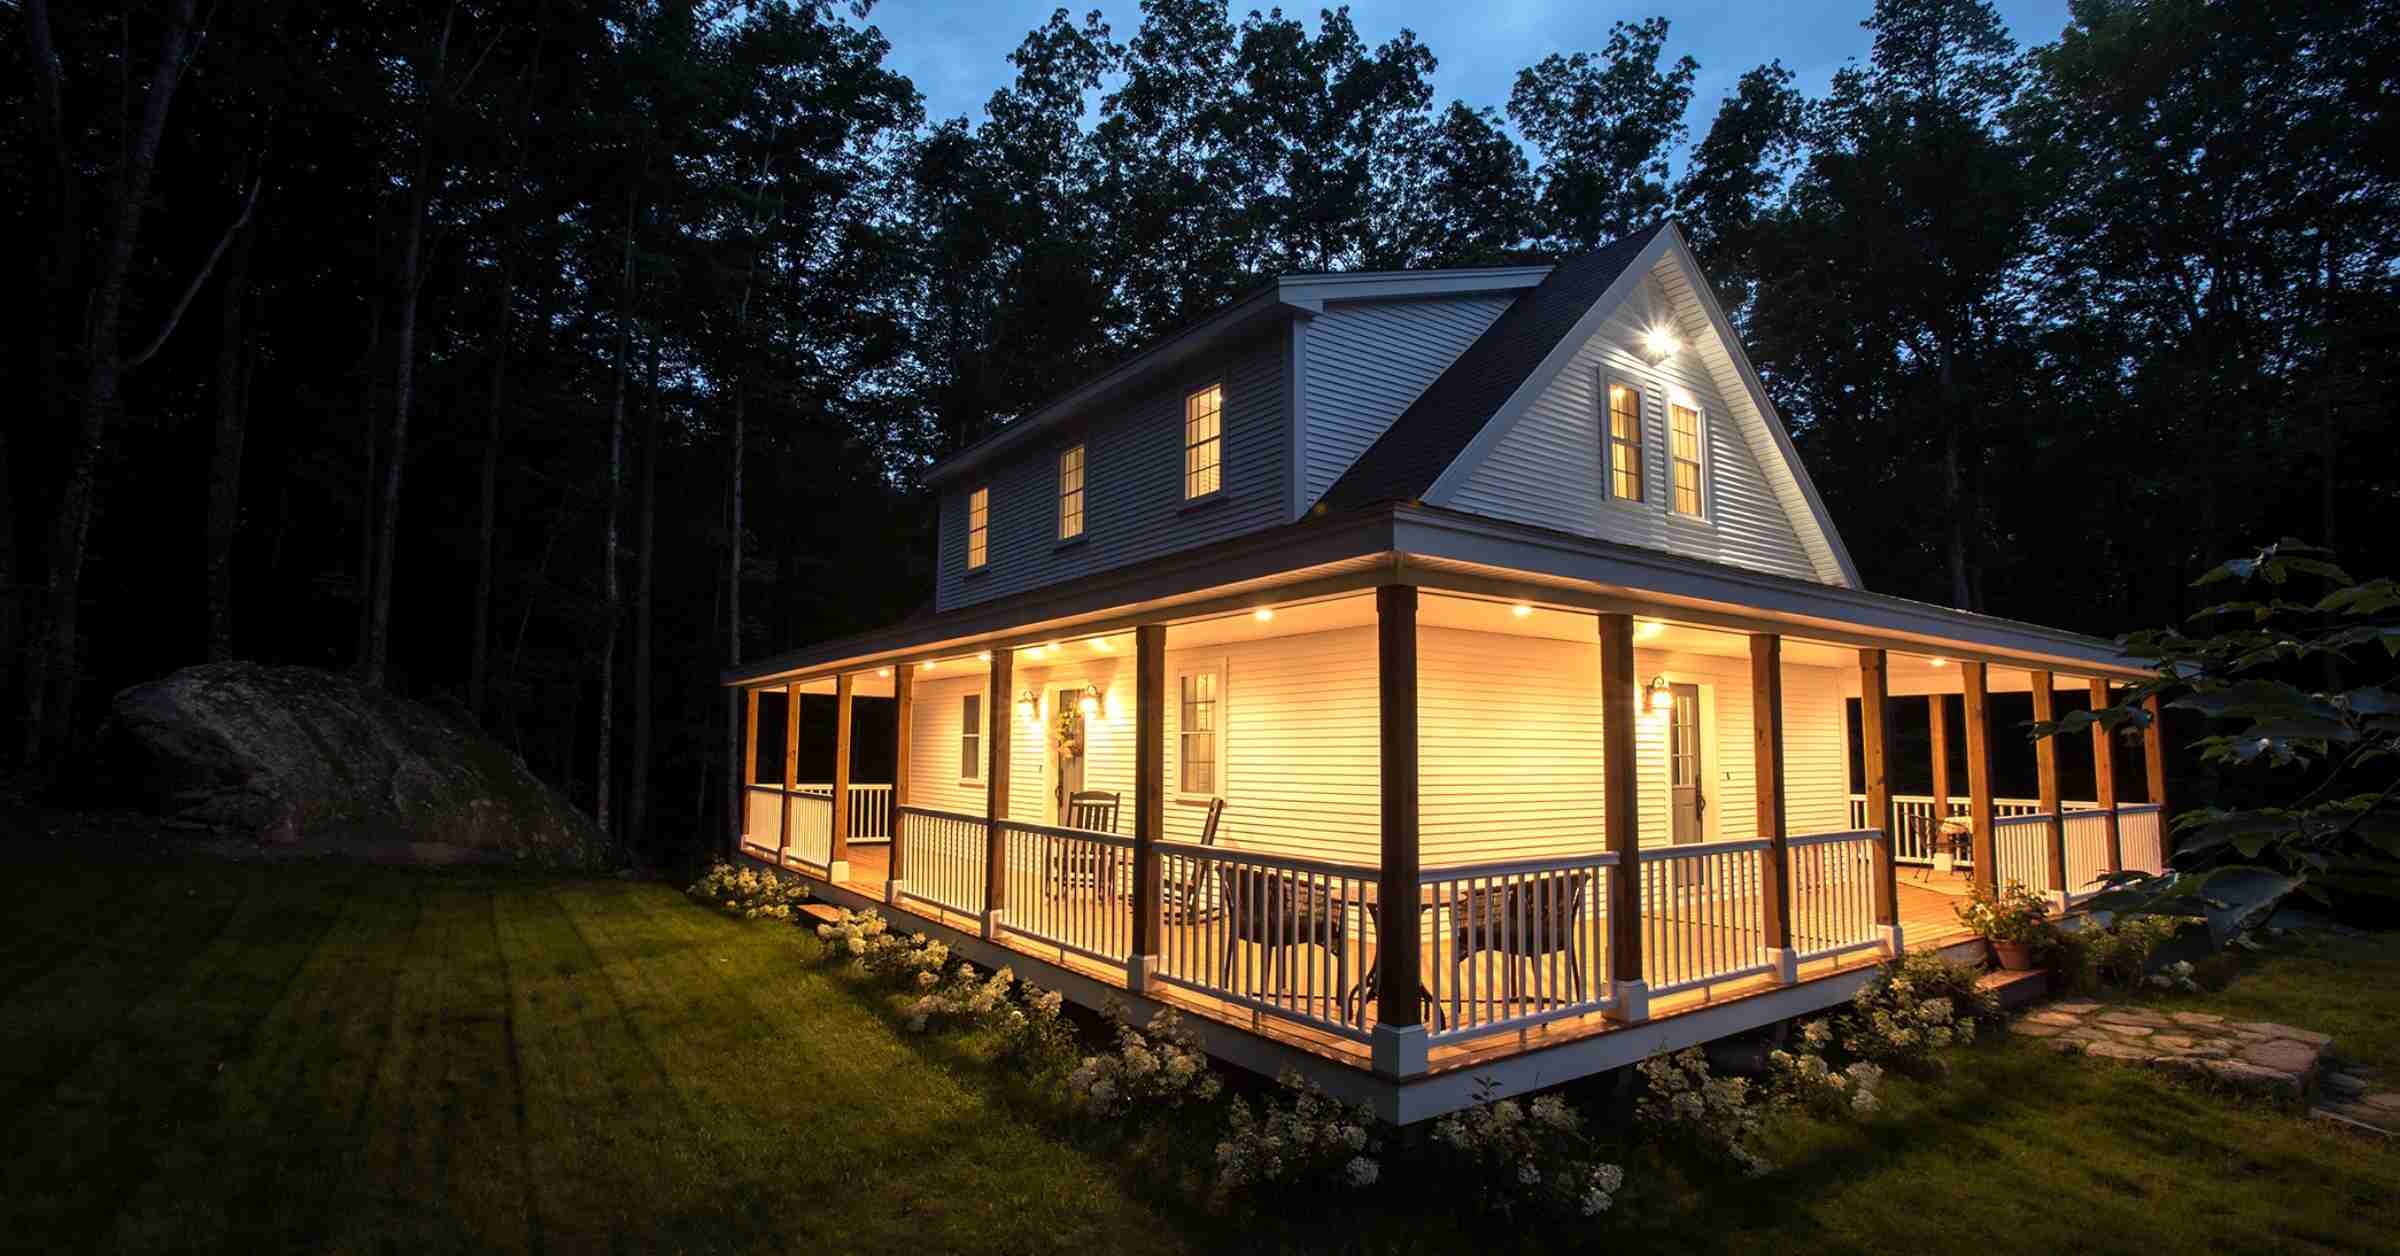 Wrap around porch with lighting on home